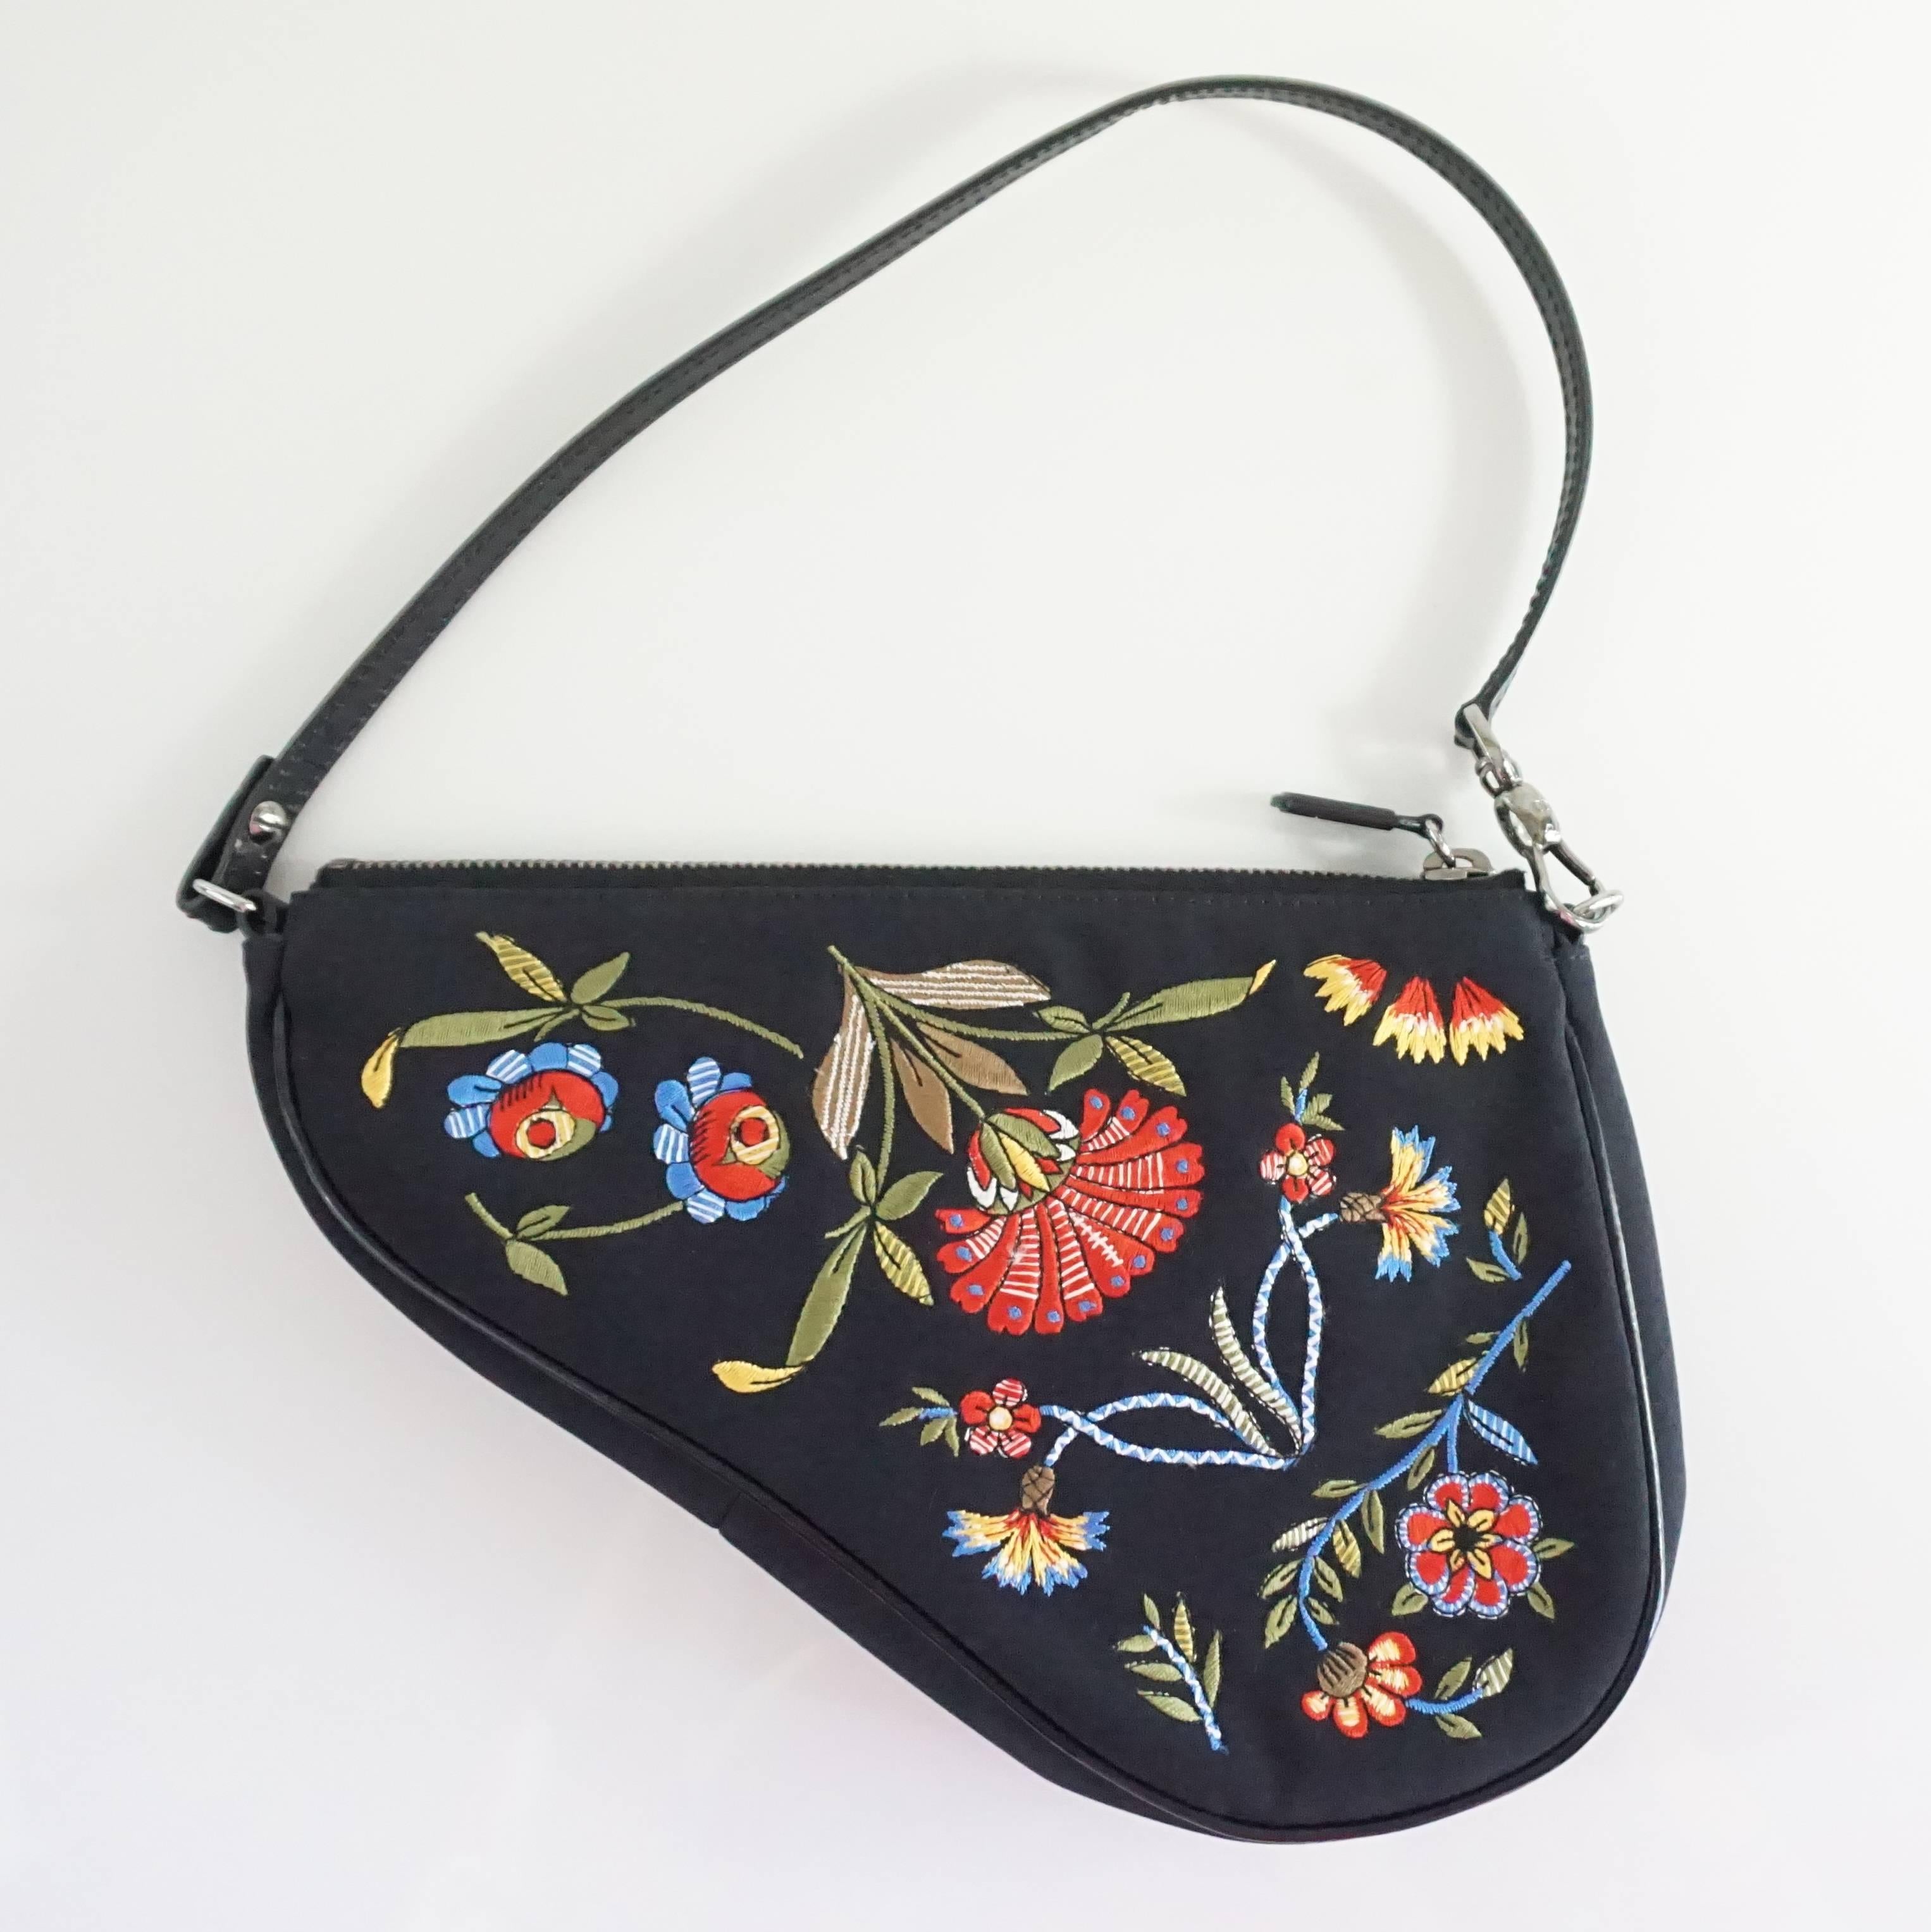 This unique Christian Dior saddle bag is black with a multicolored embroidered floral design. It has a black leather strap and a black pipe-like trim. It has a silver zipper and silver hardware. This bag is in excellent